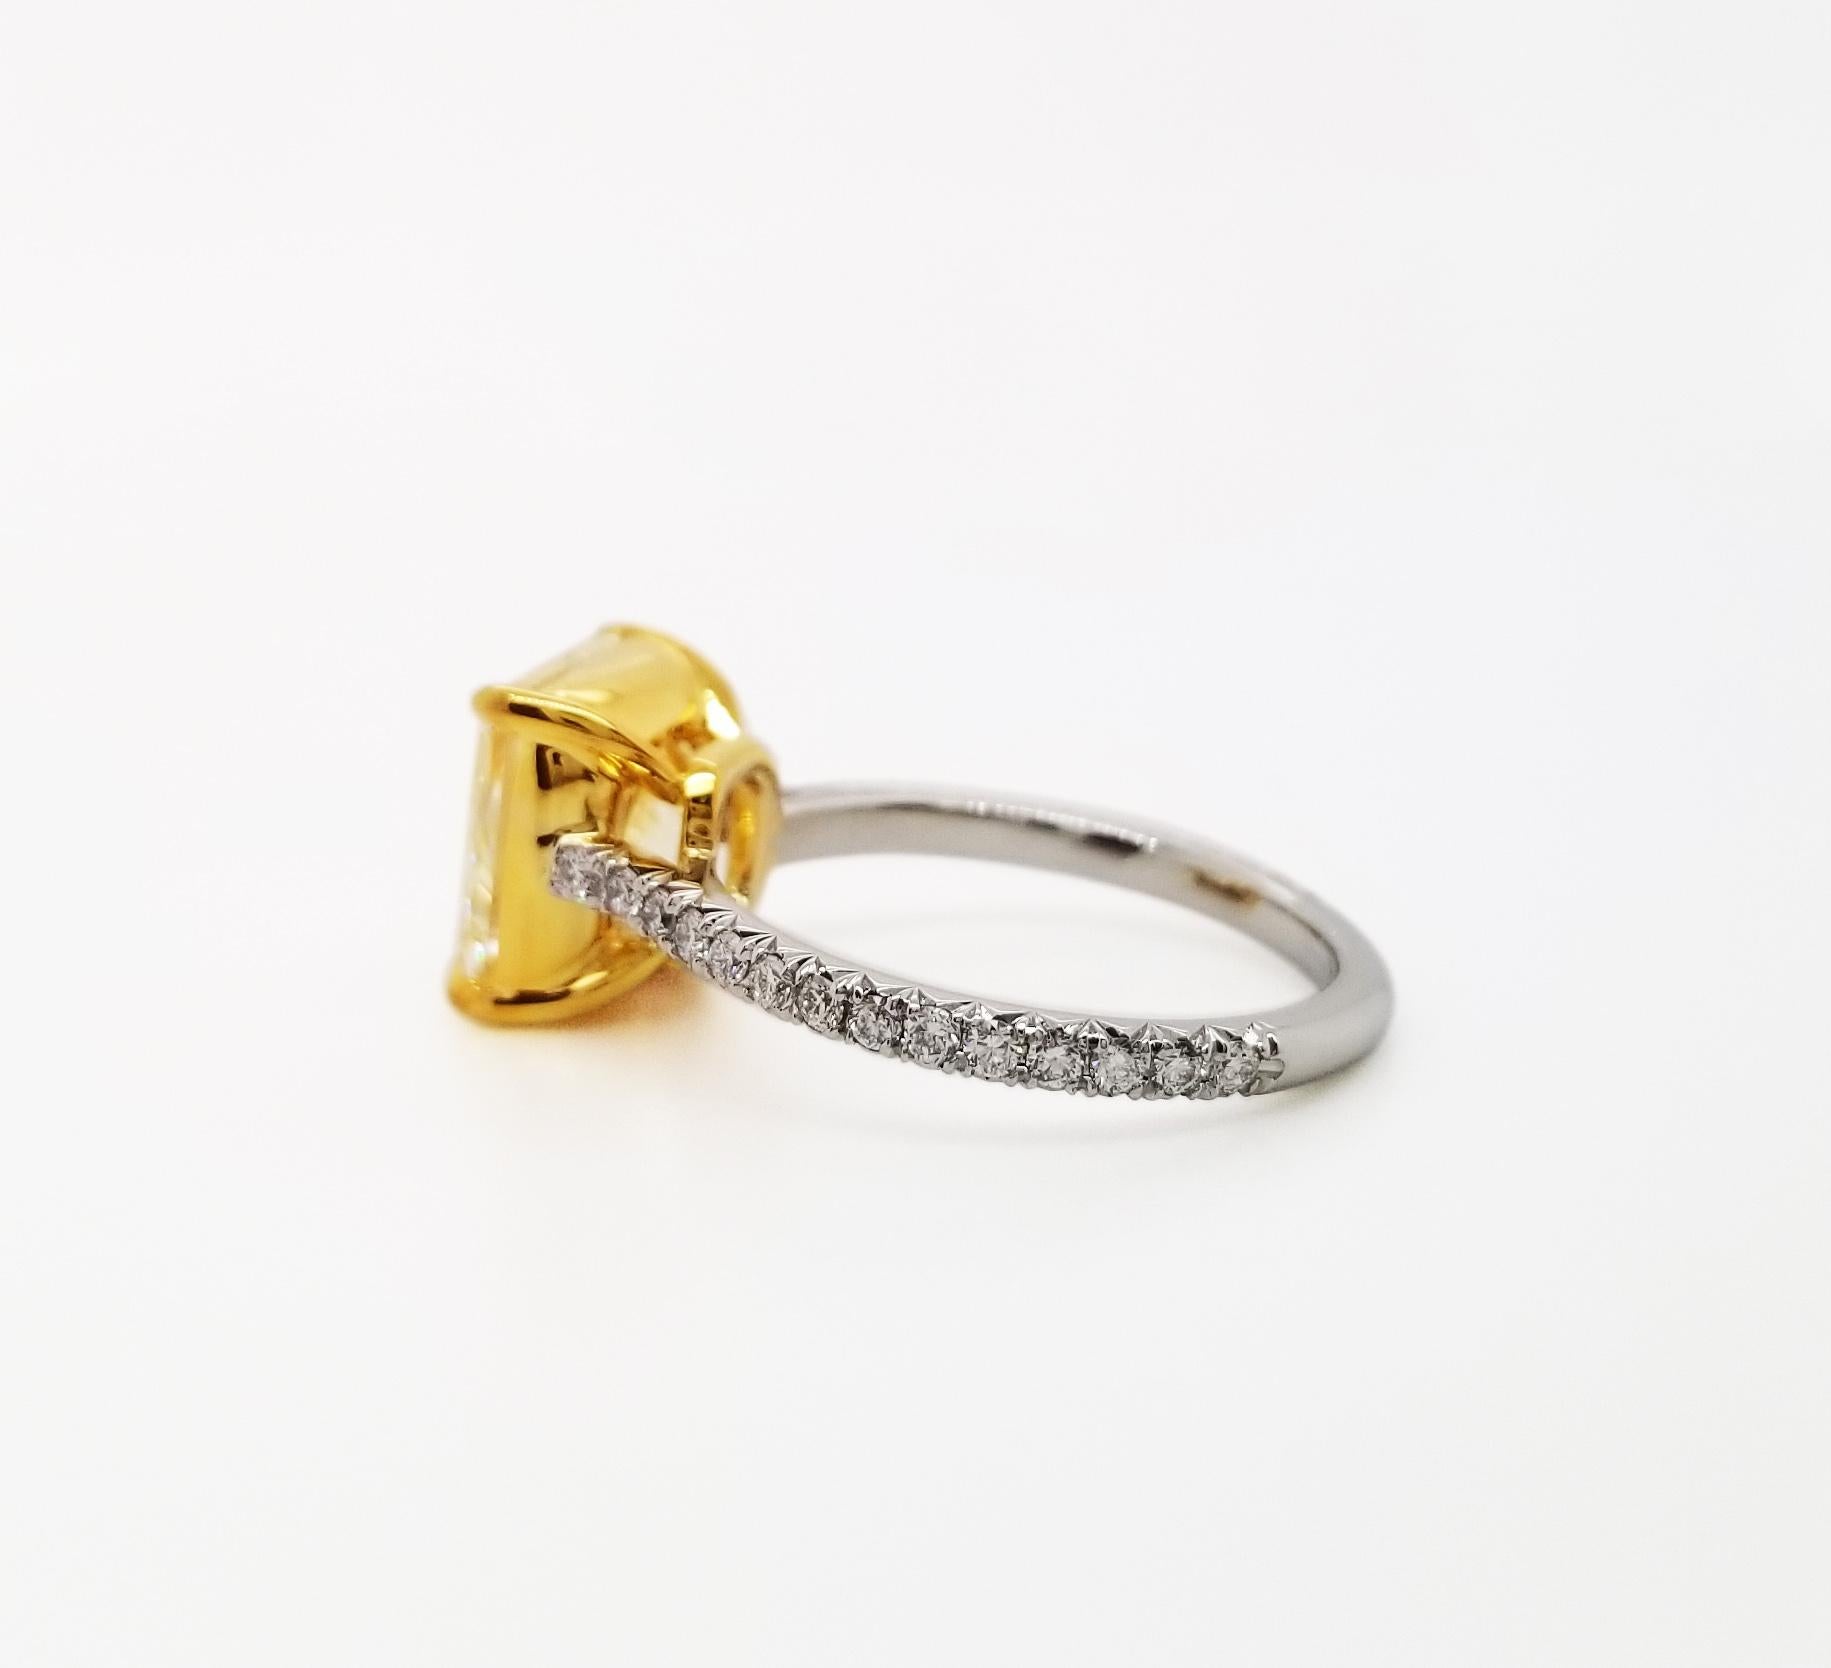 Scarselli 4 Carat Fancy Light Yellow Solitaire Platinum Ring 1